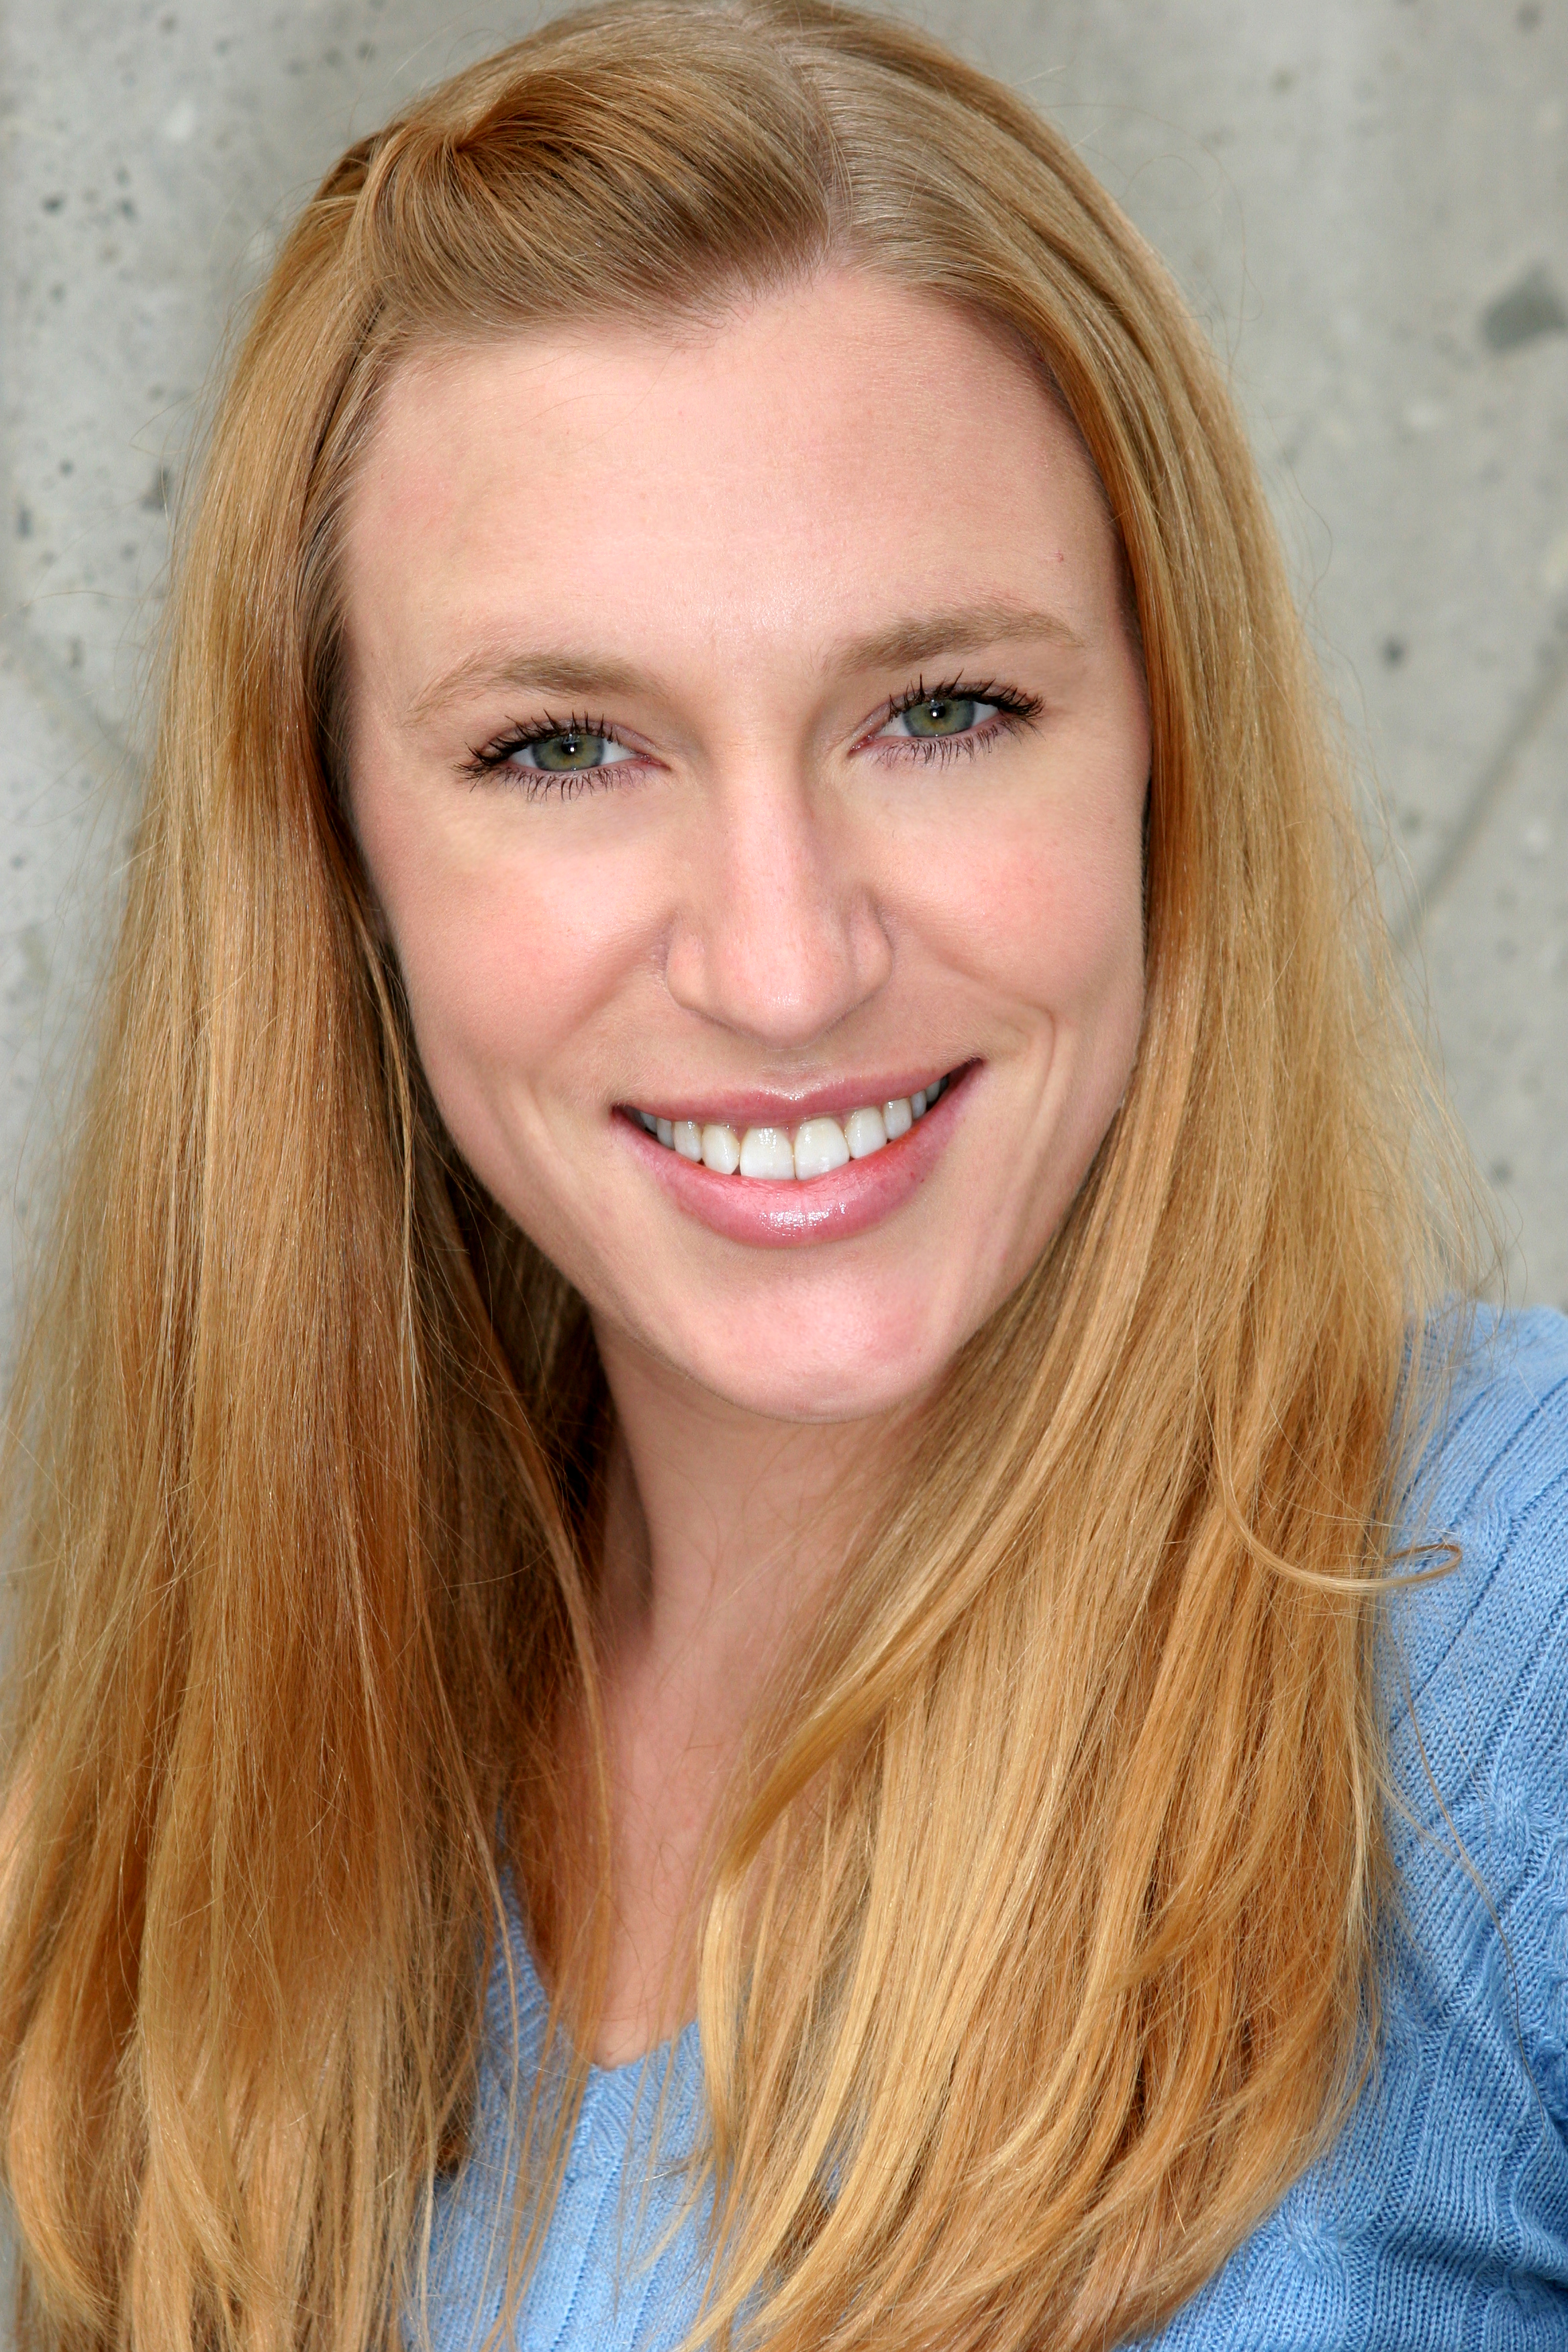 Current commercial headshot